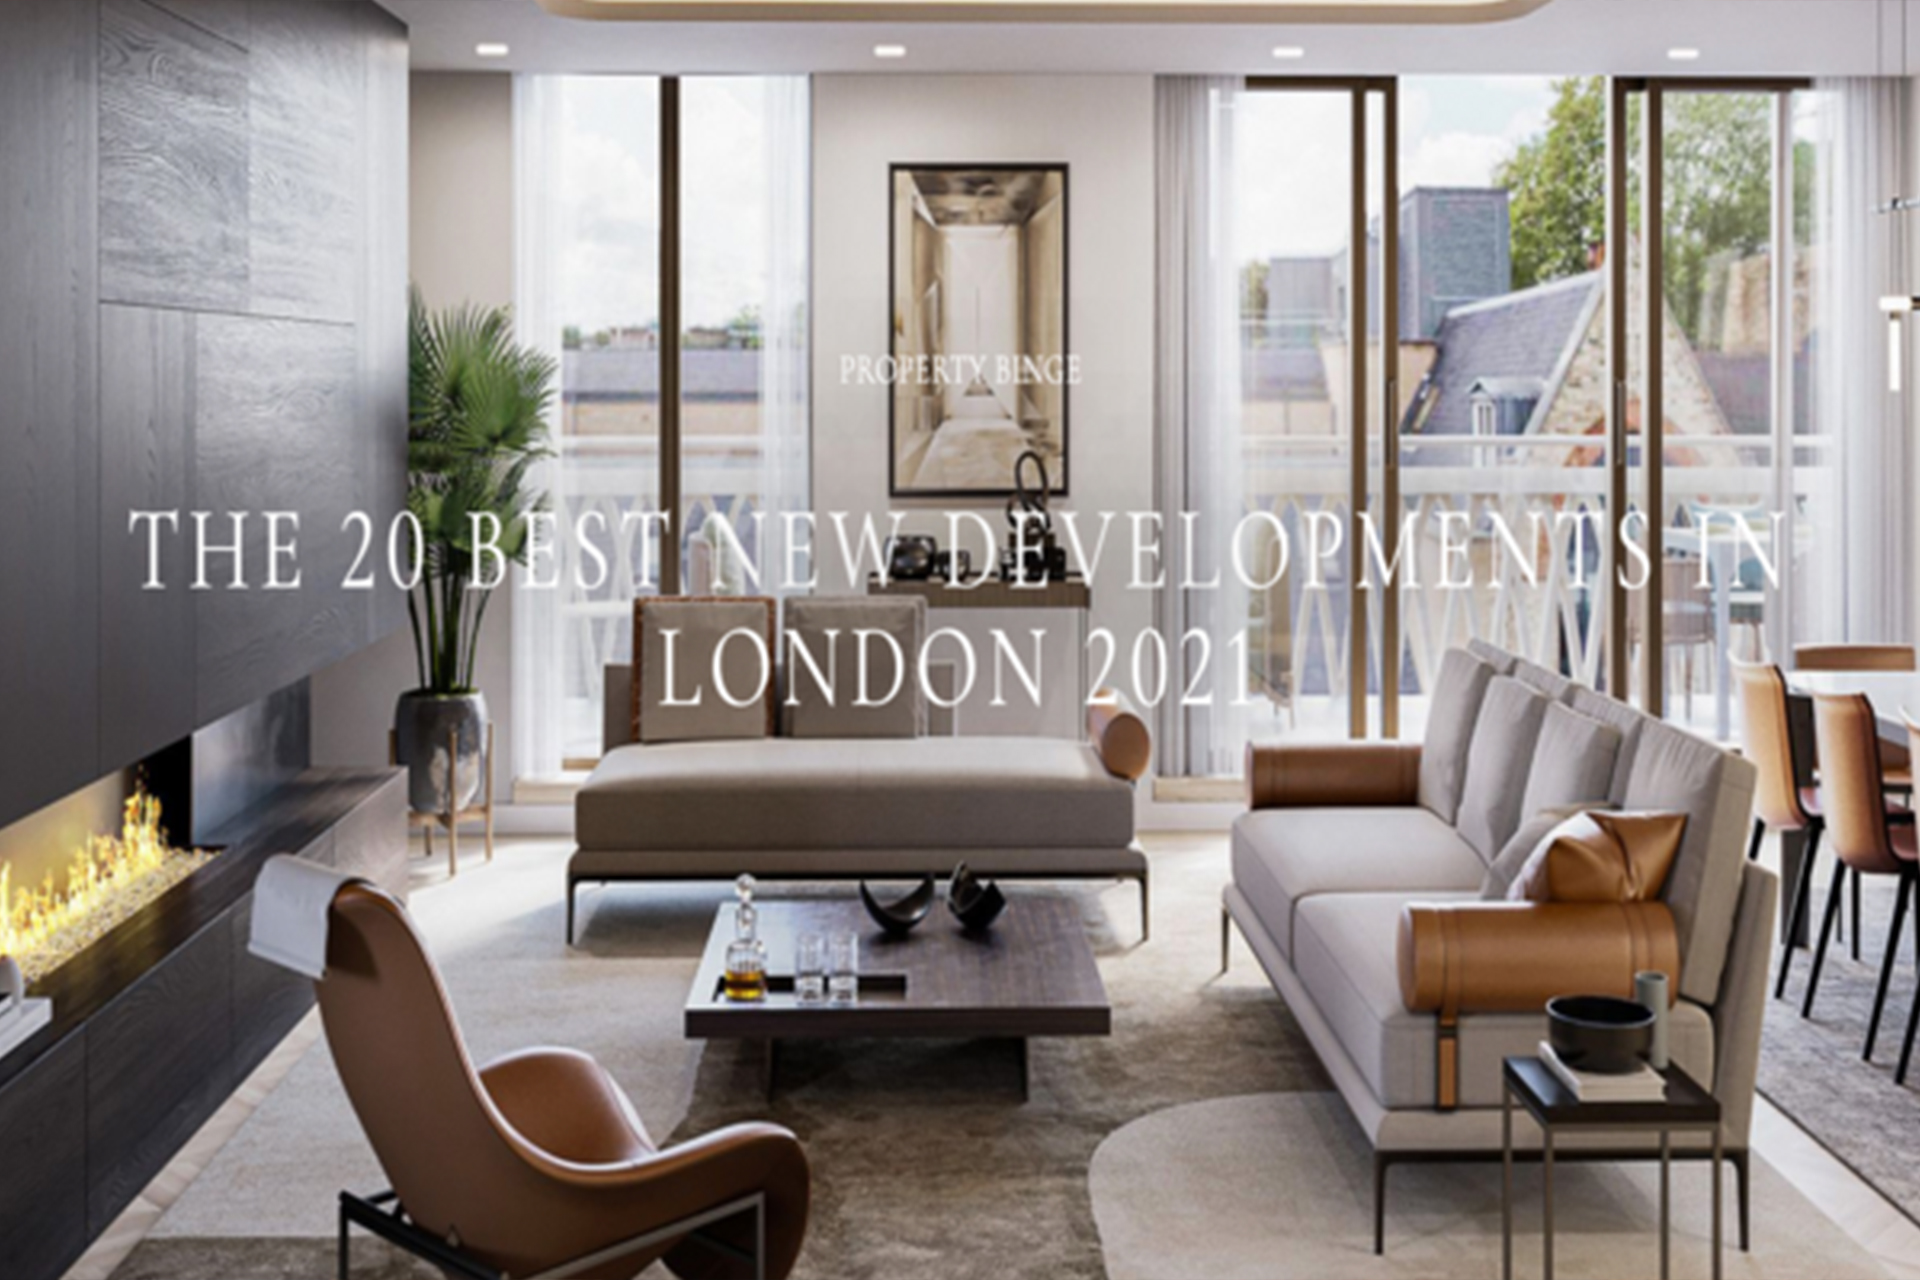 Interior image with the text 'The 20 Best New Developments in London 2021'